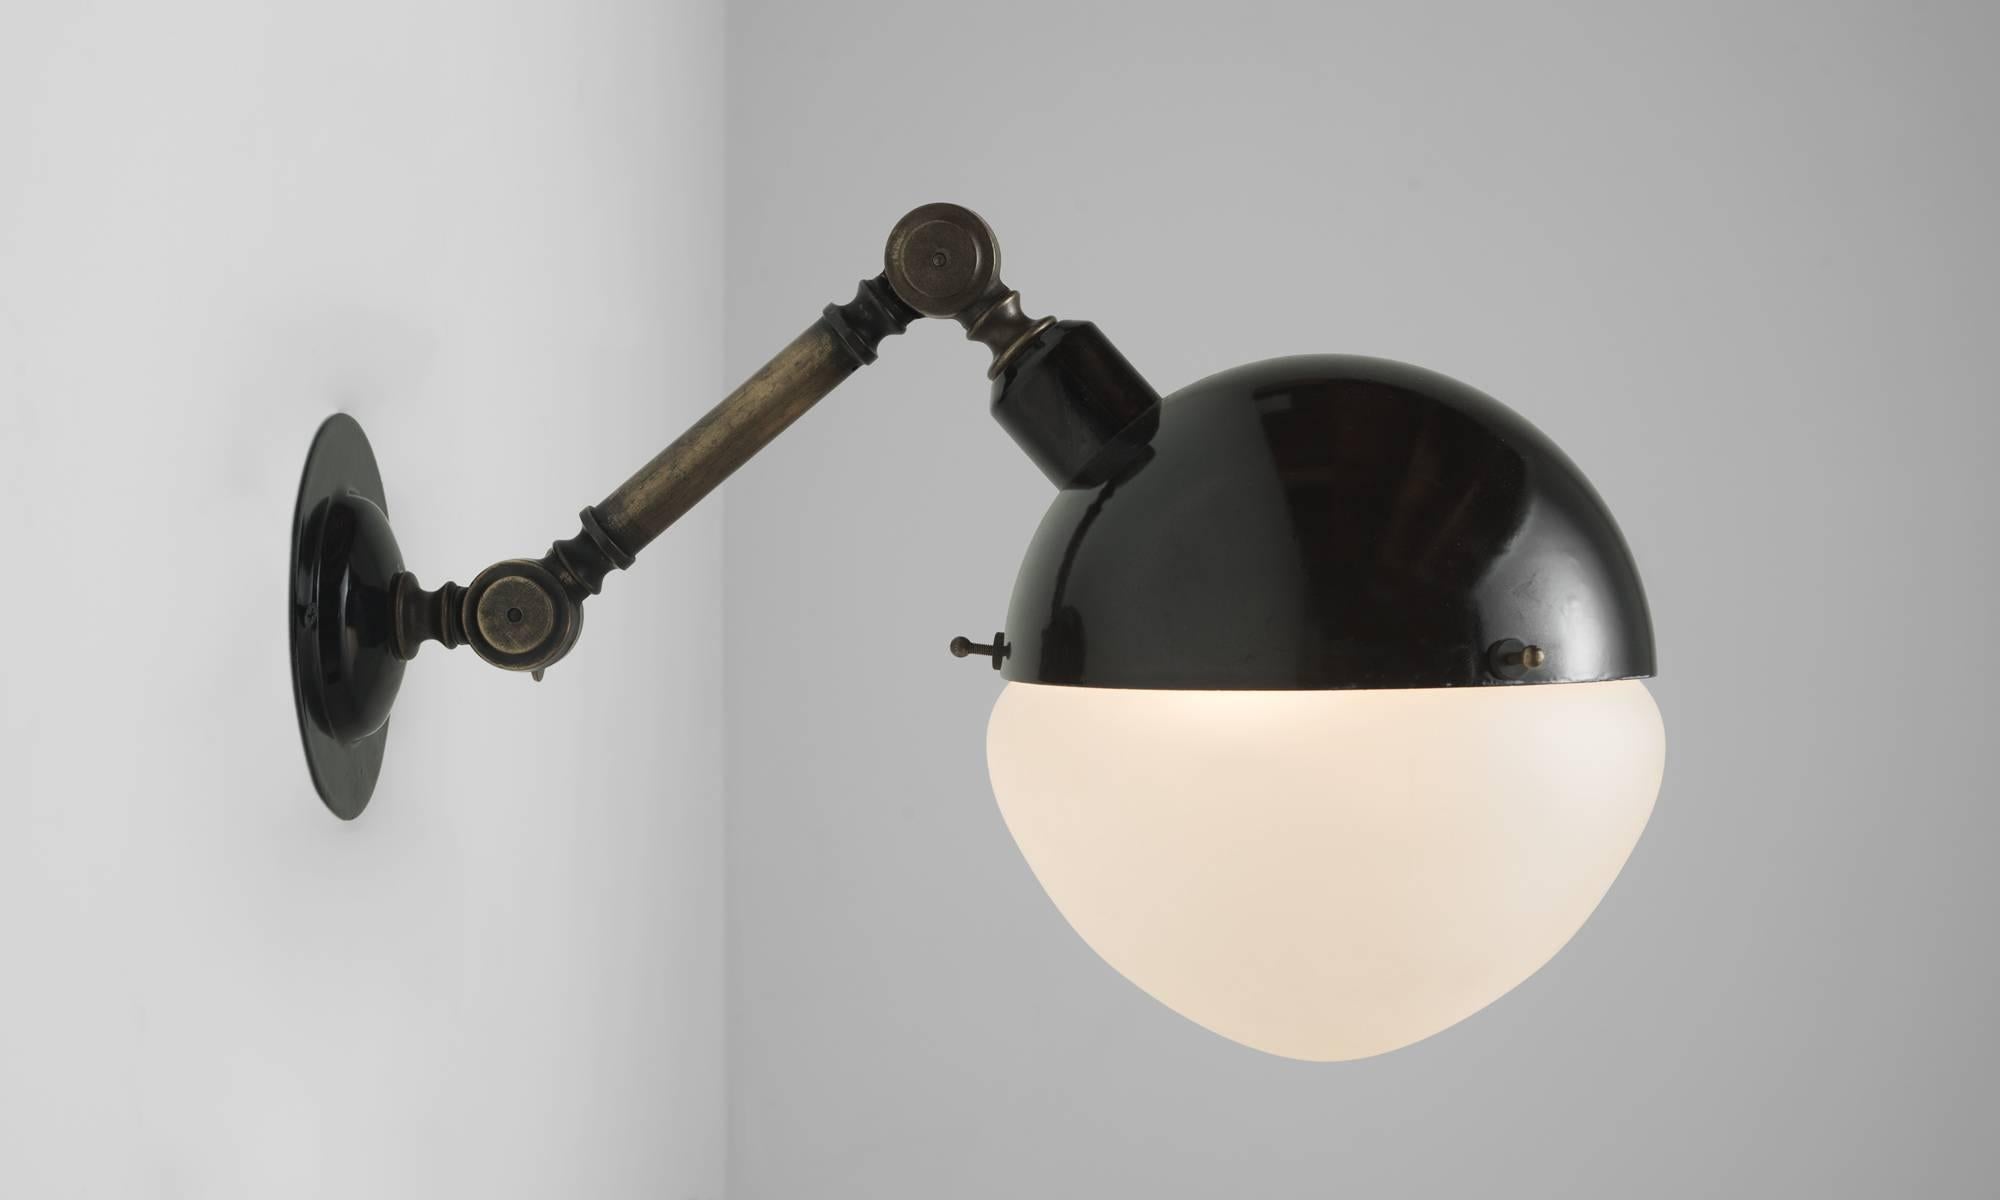 Polished metal fitter with frosted glass shade and extended brass arm, which can adjust at two points.

Made in Italy

9